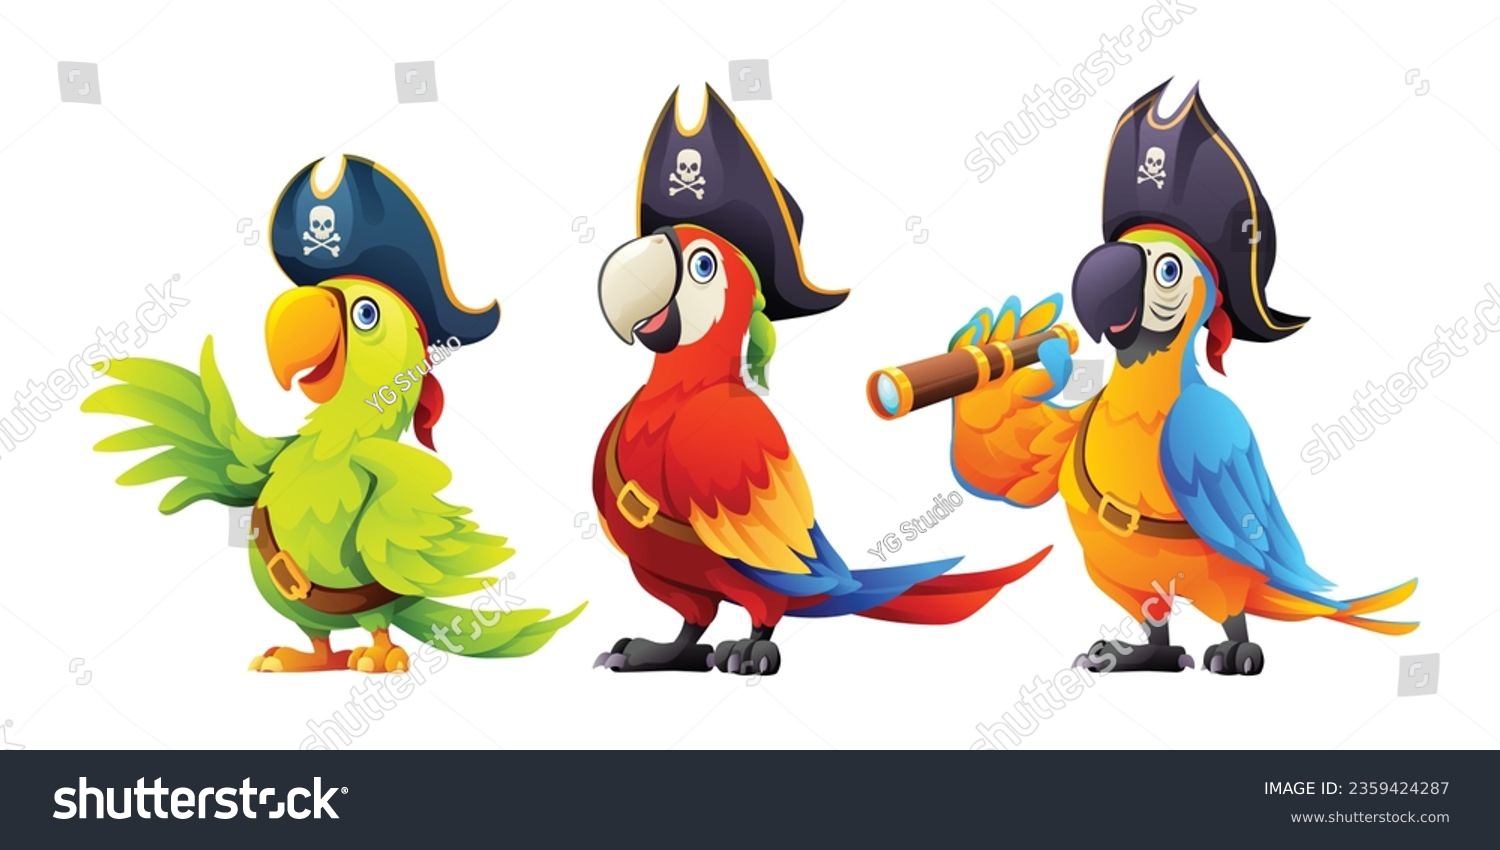 SVG of Set of cute pirate birds cartoon illustration isolated on white background svg